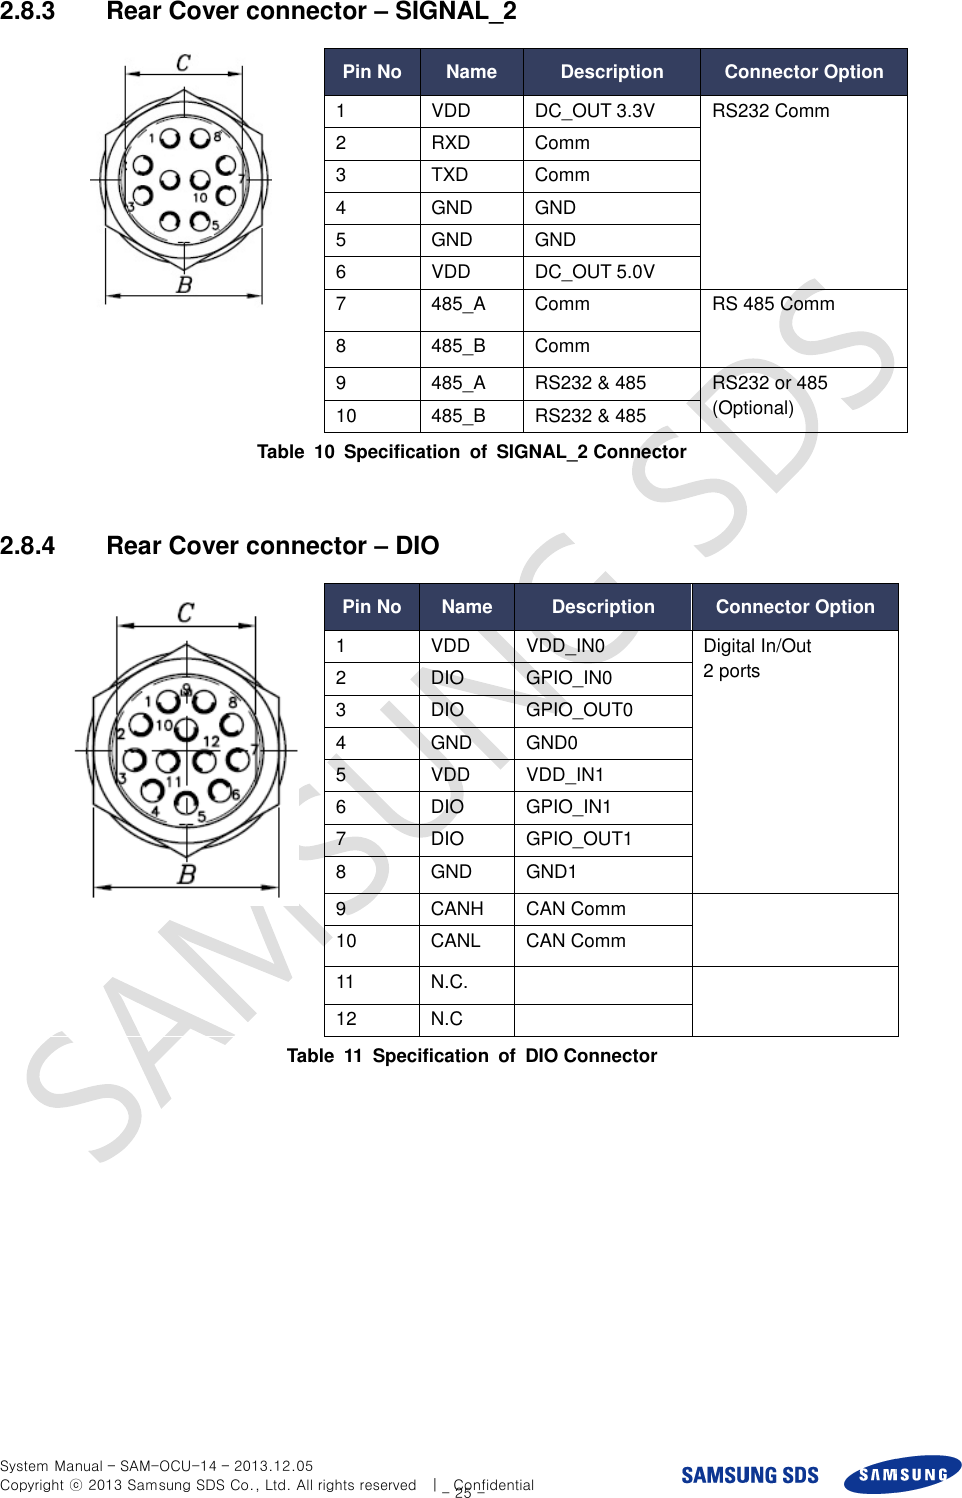  System Manual – SAM-OCU-14 – 2013.12.05 Copyright ⓒ 2013 Samsung SDS Co., Ltd. All rights reserved    |    Confidential - 25 - 2.8.3  Rear Cover connector – SIGNAL_2   Pin No Name Description Connector Option 1 VDD DC_OUT 3.3V RS232 Comm 2 RXD Comm 3 TXD Comm 4 GND GND 5 GND GND 6 VDD DC_OUT 5.0V 7 485_A Comm RS 485 Comm 8 485_B Comm 9 485_A RS232 &amp; 485 RS232 or 485 (Optional) 10 485_B RS232 &amp; 485 Table  10  Specification  of  SIGNAL_2 Connector  2.8.4  Rear Cover connector – DIO   Pin No Name Description Connector Option 1 VDD VDD_IN0 Digital In/Out 2 ports 2 DIO GPIO_IN0   3 DIO GPIO_OUT0 4 GND GND0 5 VDD VDD_IN1 6 DIO GPIO_IN1 7 DIO GPIO_OUT1 8 GND GND1 9 CANH CAN Comm   10 CANL CAN Comm 11 N.C.   12 N.C  Table  11  Specification  of  DIO Connector  